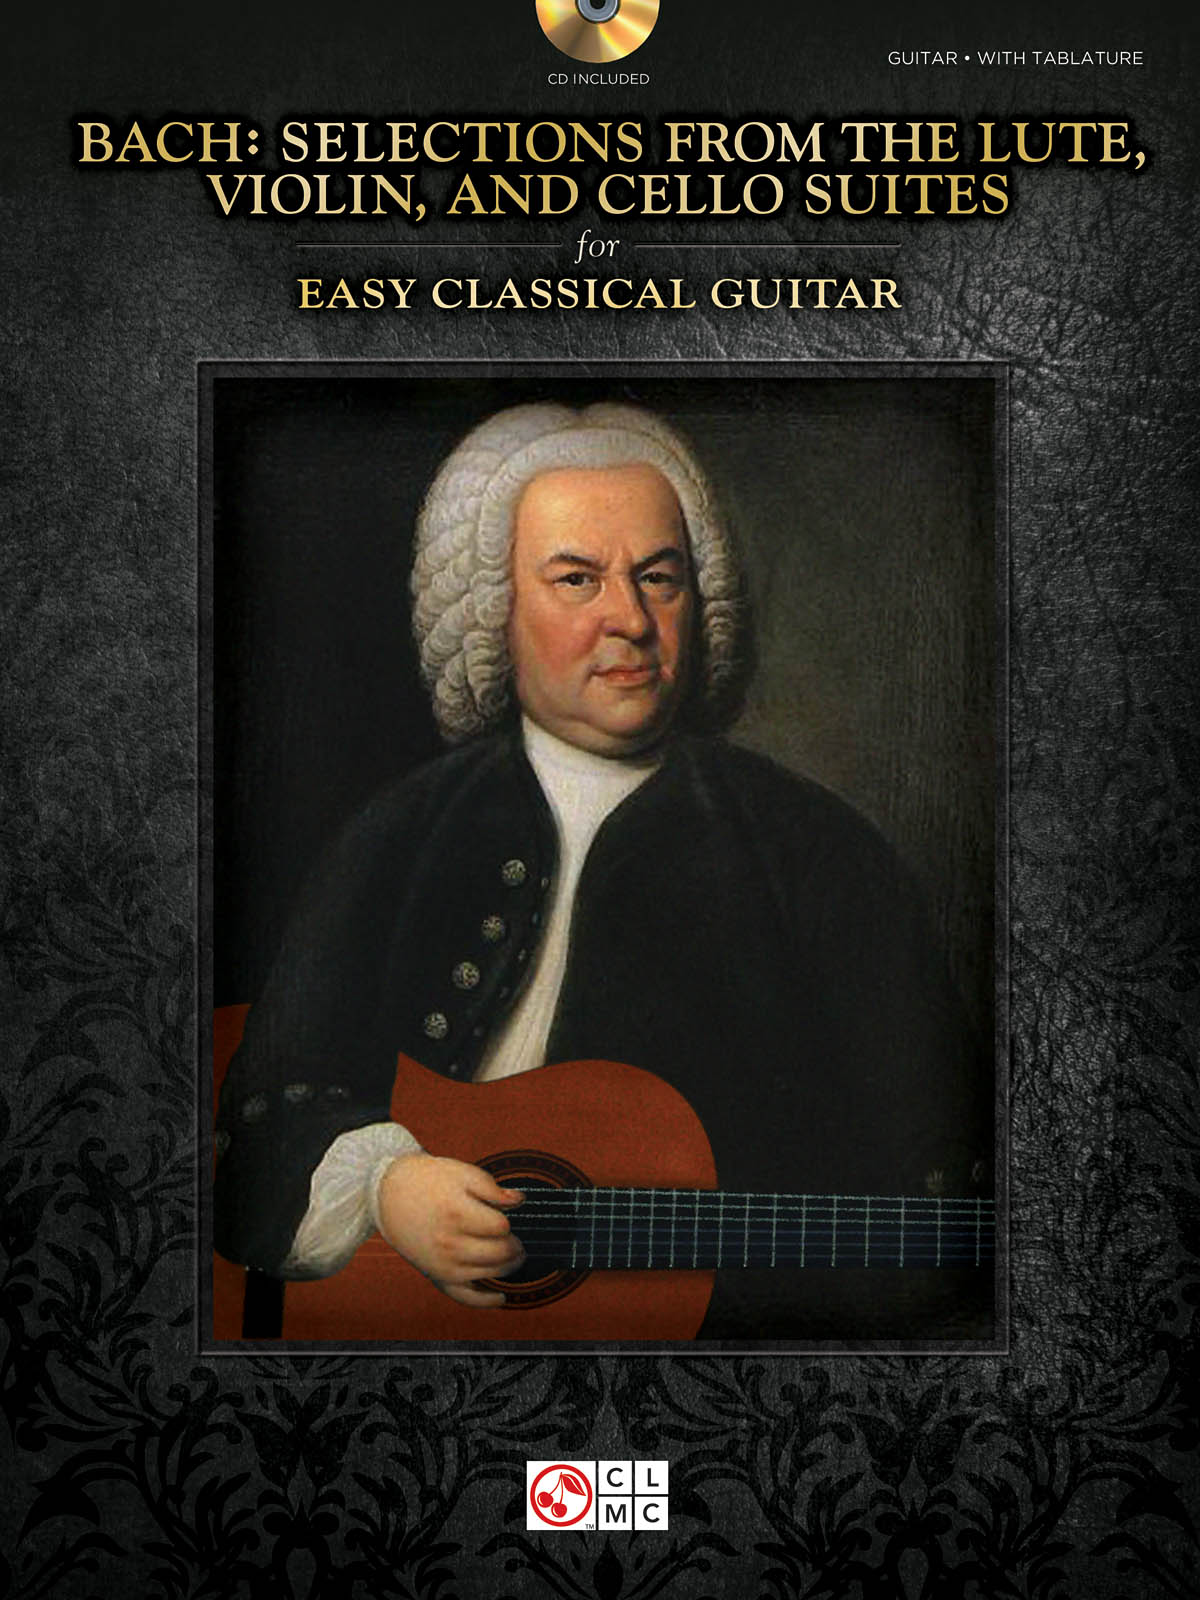 Johann Sebastian Bach: Selections From The Lute  Violin  And Cello Suites: